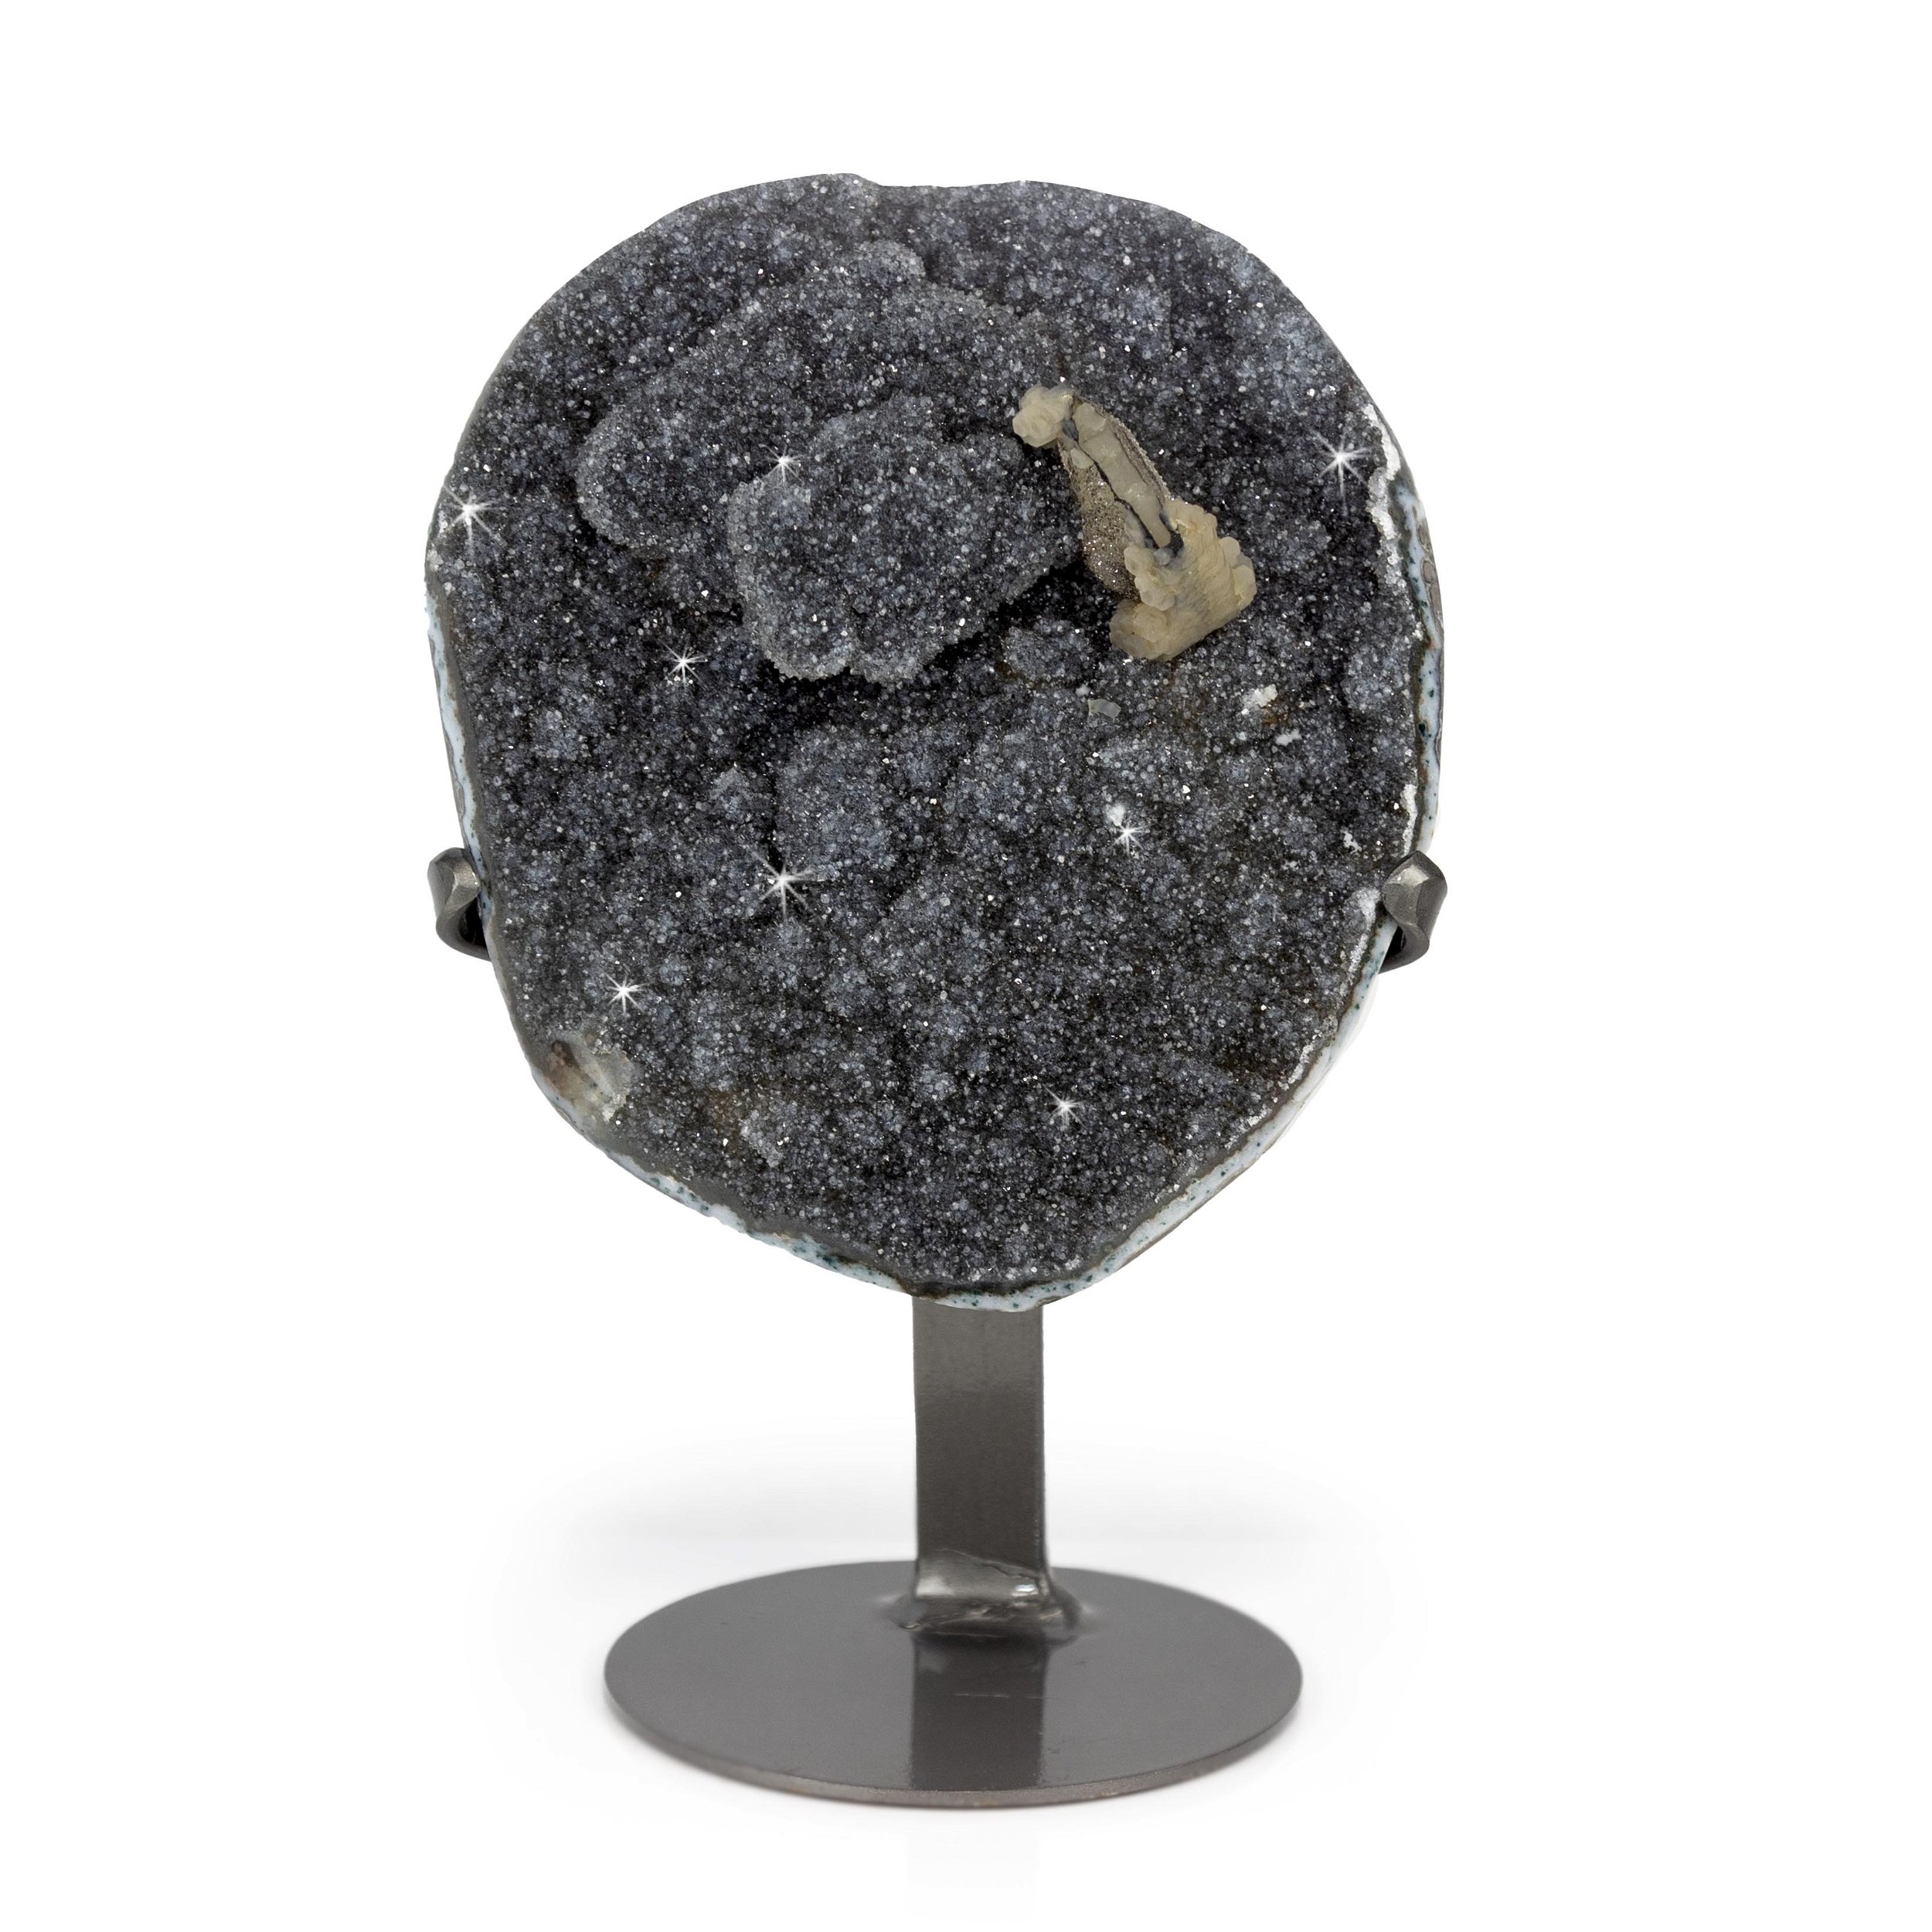 Basalt Druze Plaque On A Fitted Stand With Calcite Druze Cluster And Druze Bulge